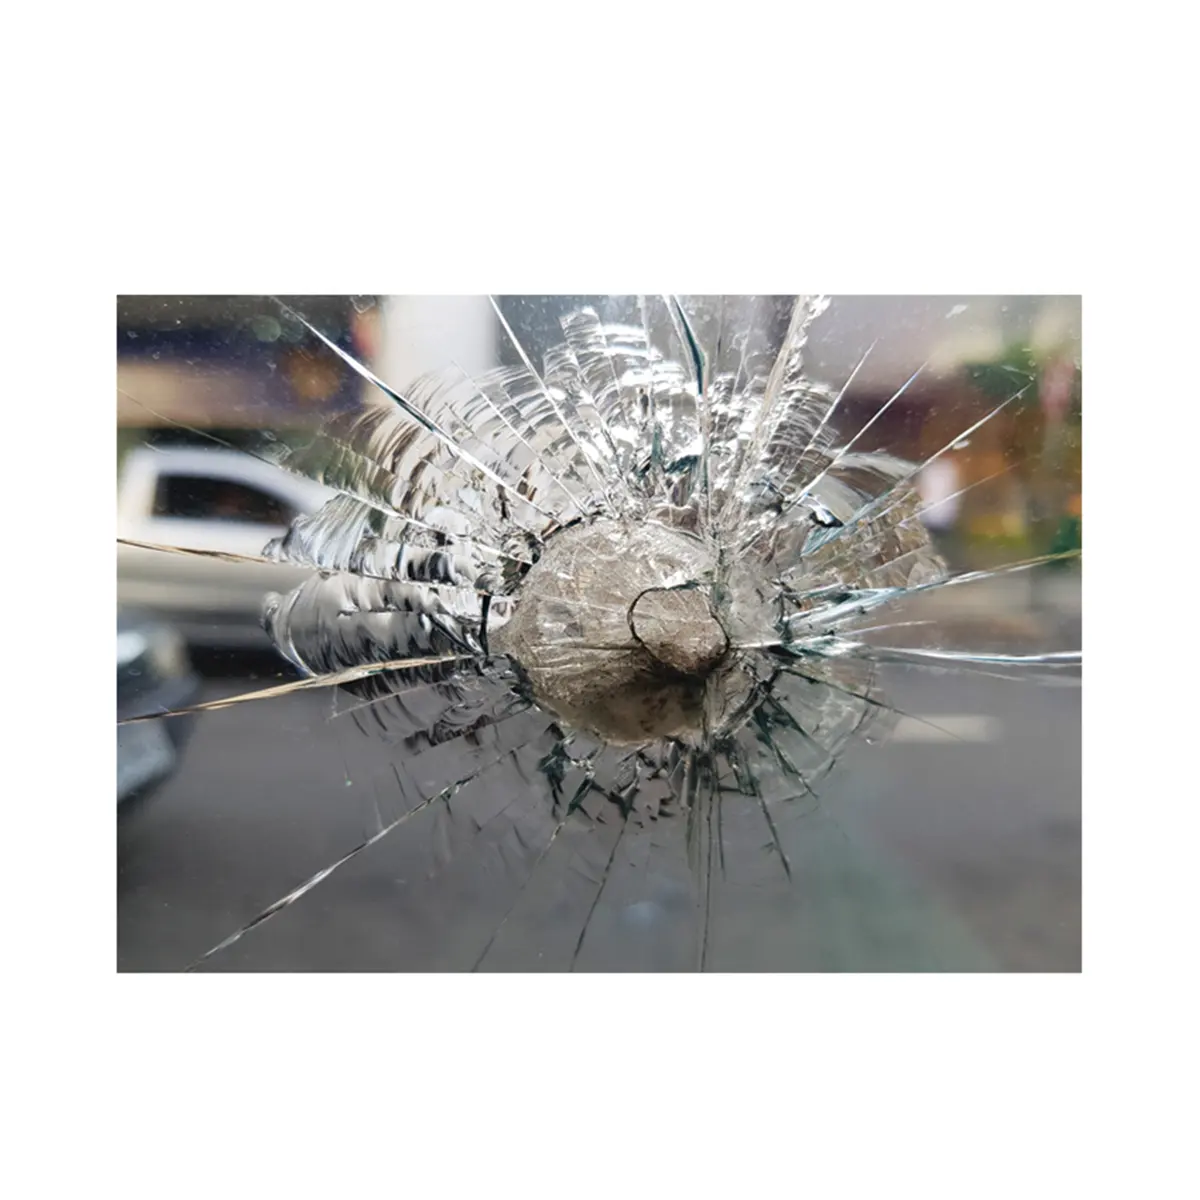 Bullet Resistant Glass Unyielding Protection in High-Risk Situations with Impenetrable Bullet-Resistant Glass